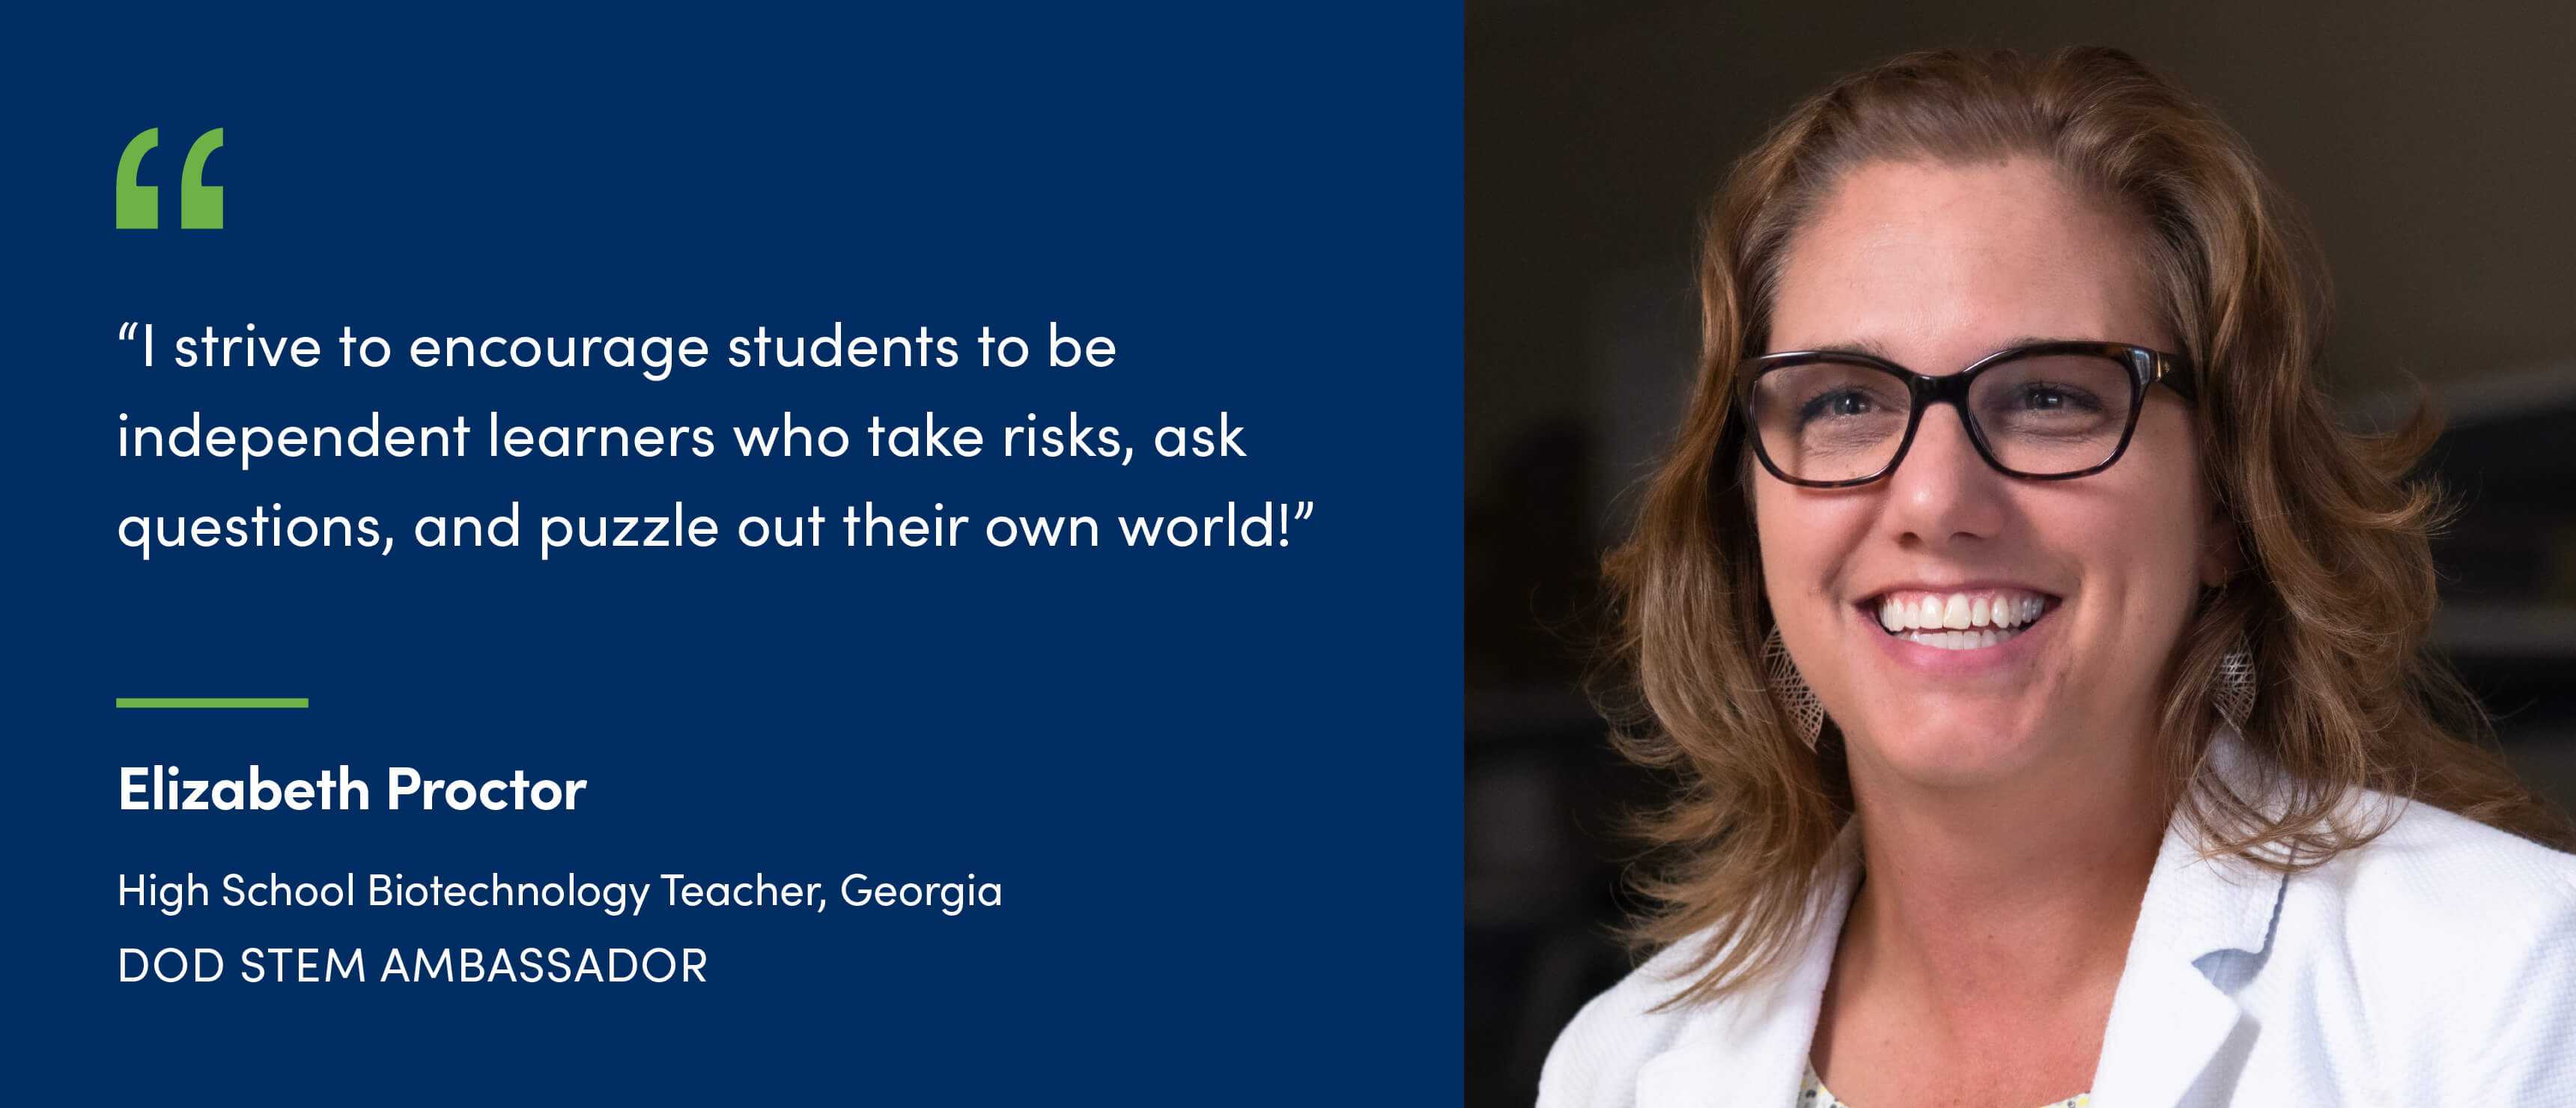 A quote from Elizabeth Proctor, High School Biotechnology Teacher in Georgia and DoD STEM Ambassador. I strive to encourage students to be independent learners who take risks, ask questions, and puzzle out their own world!